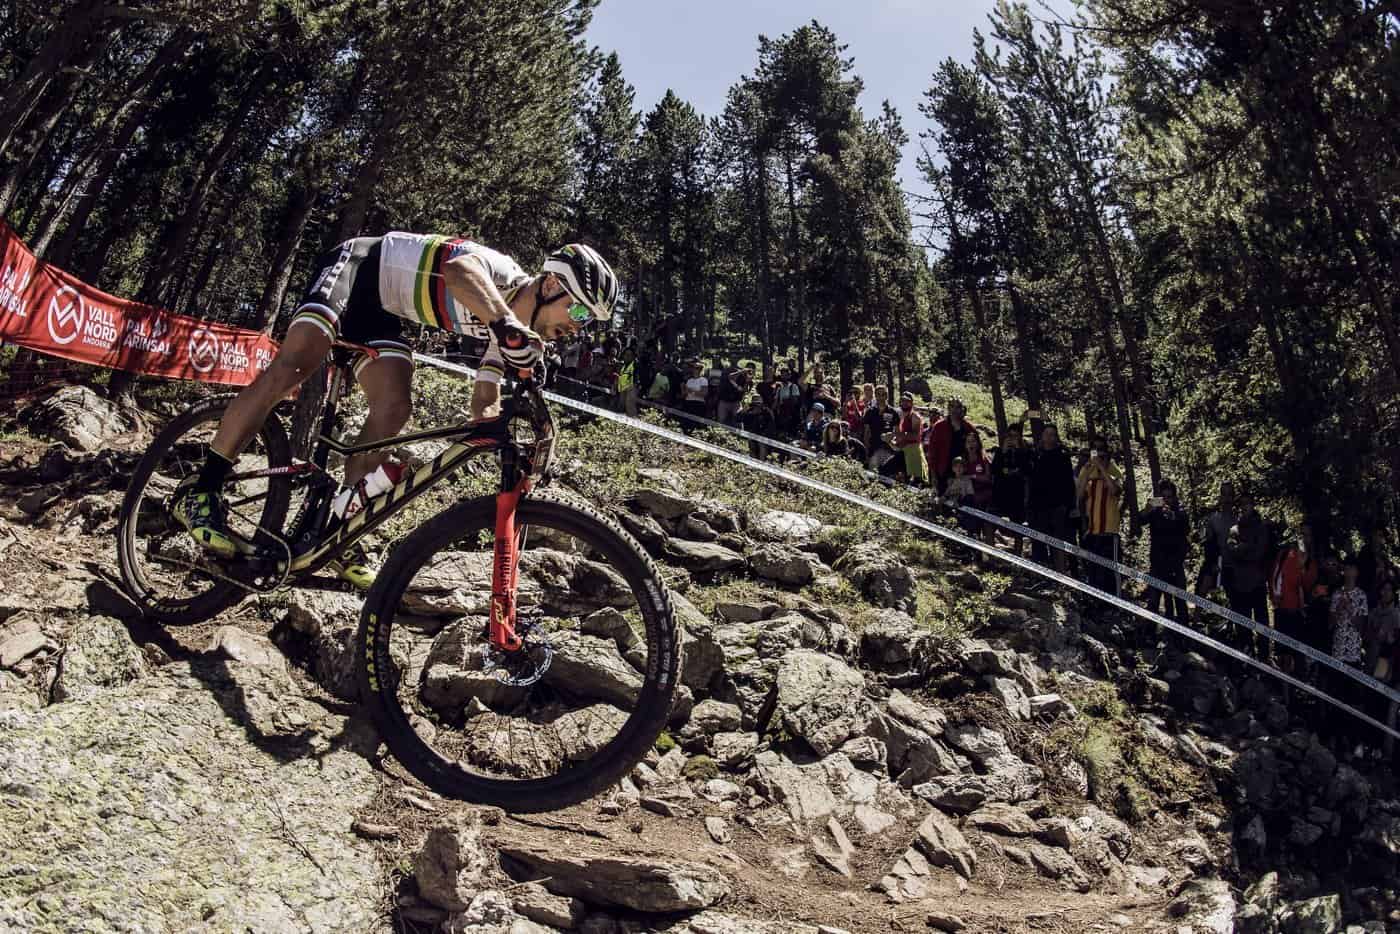 Nino Schurter performs at UCI XCO World Cup in Vallnord, Andorra on July 2nd, 2017 // Bartek Wolinski/Red Bull Content Pool // P-20170702-01564 // Usage for editorial use only // Please go to www.redbullcontentpool.com for further information. //